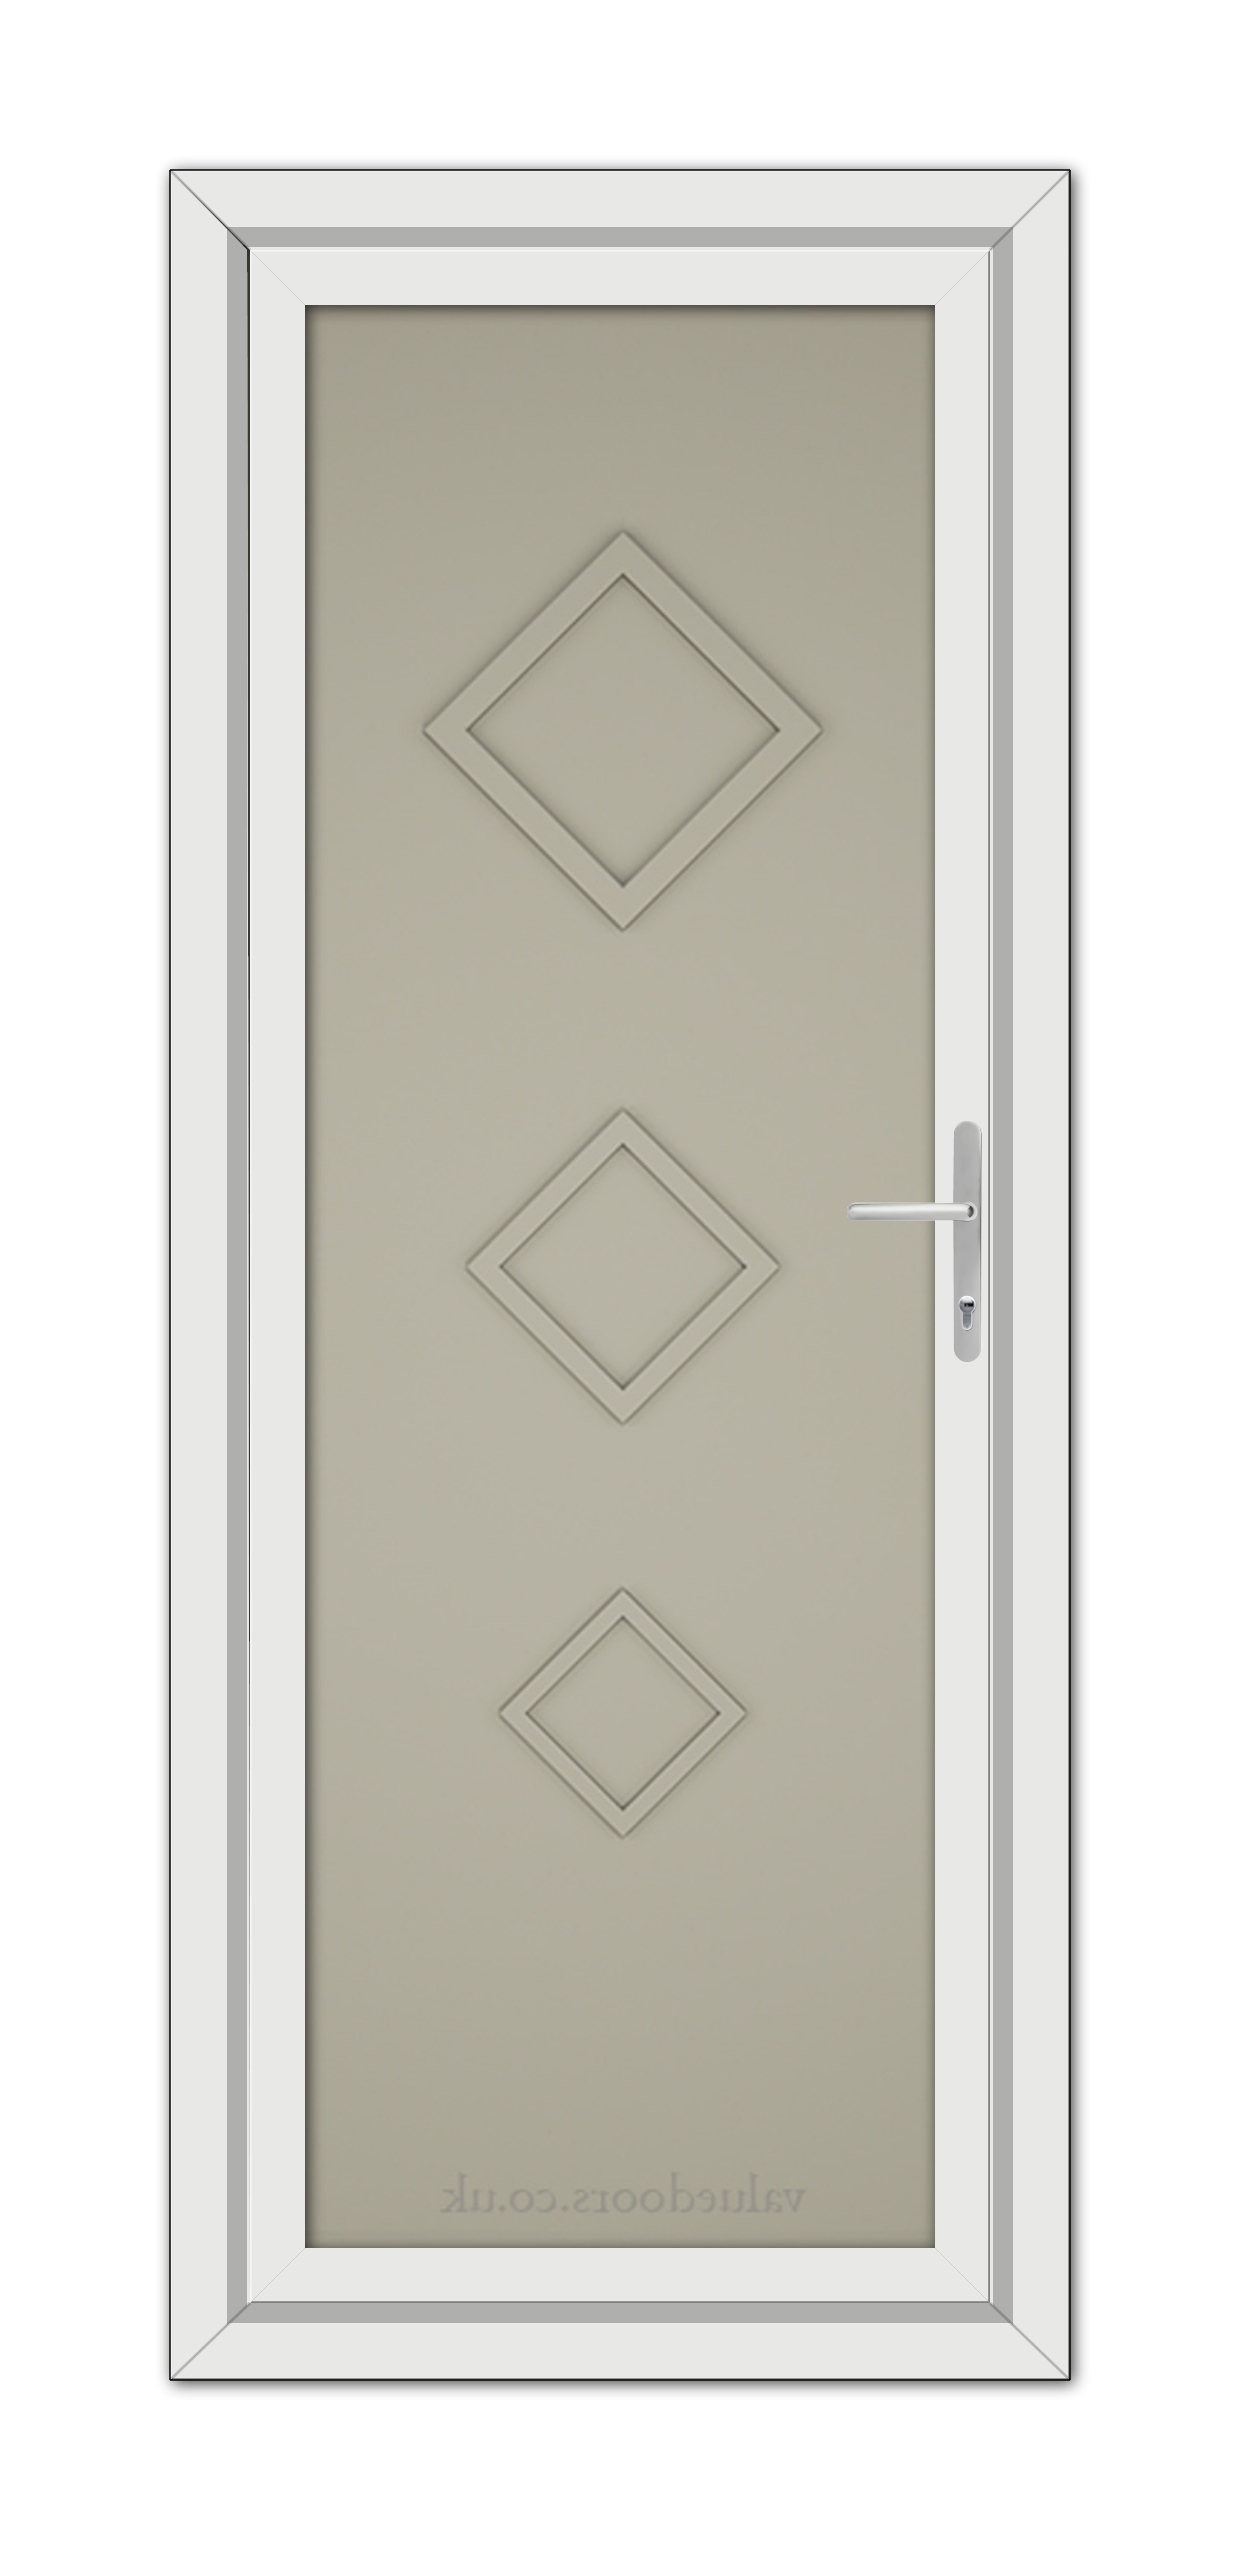 A Pebble Grey Modern 5123 Solid uPVC Door with three diamond-shaped panels and a silver handle, installed in a white frame.